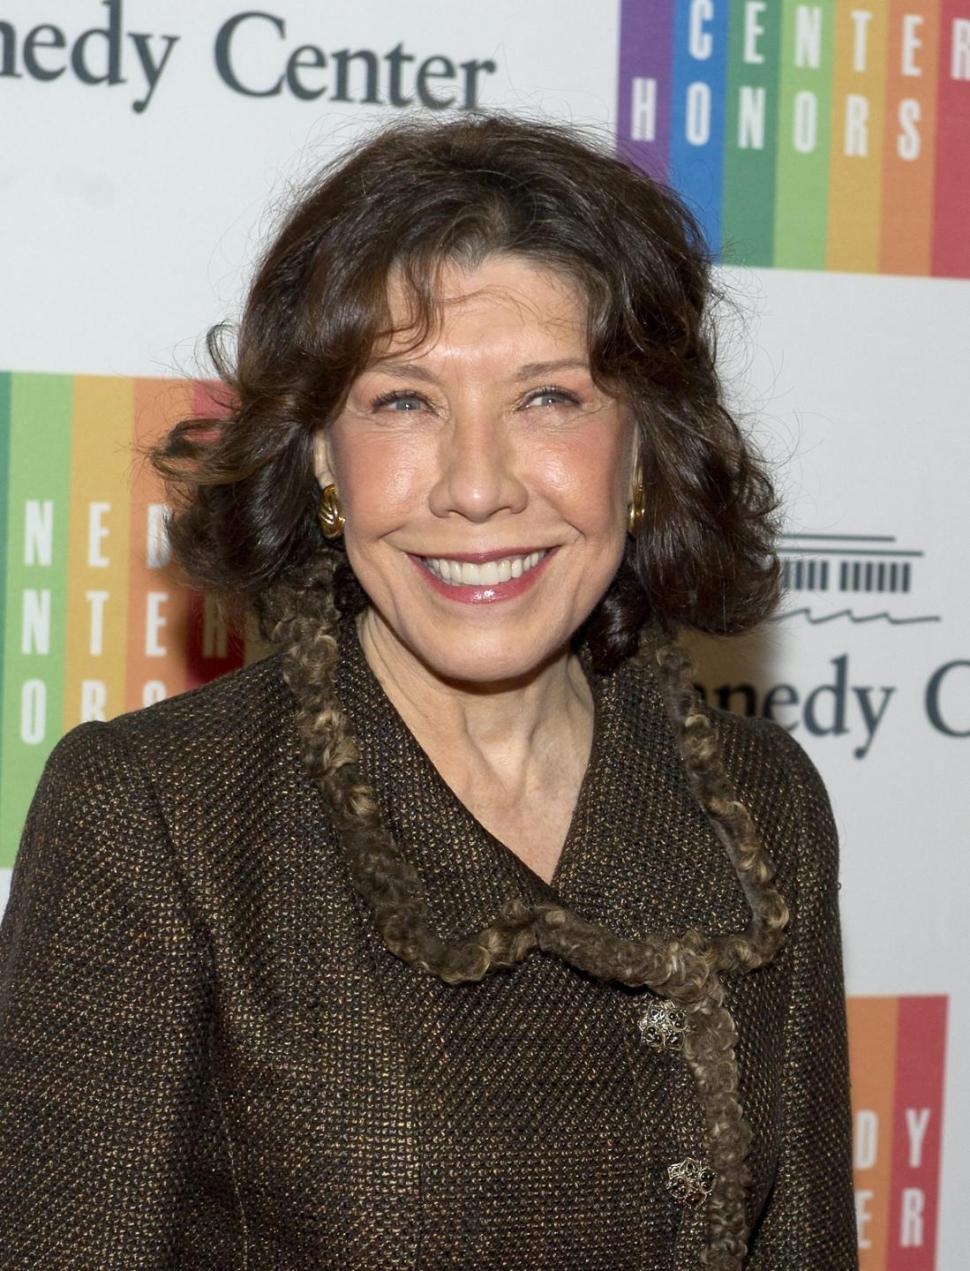 Actress and comedian Lily Tomlin was among five artists to receive the award.